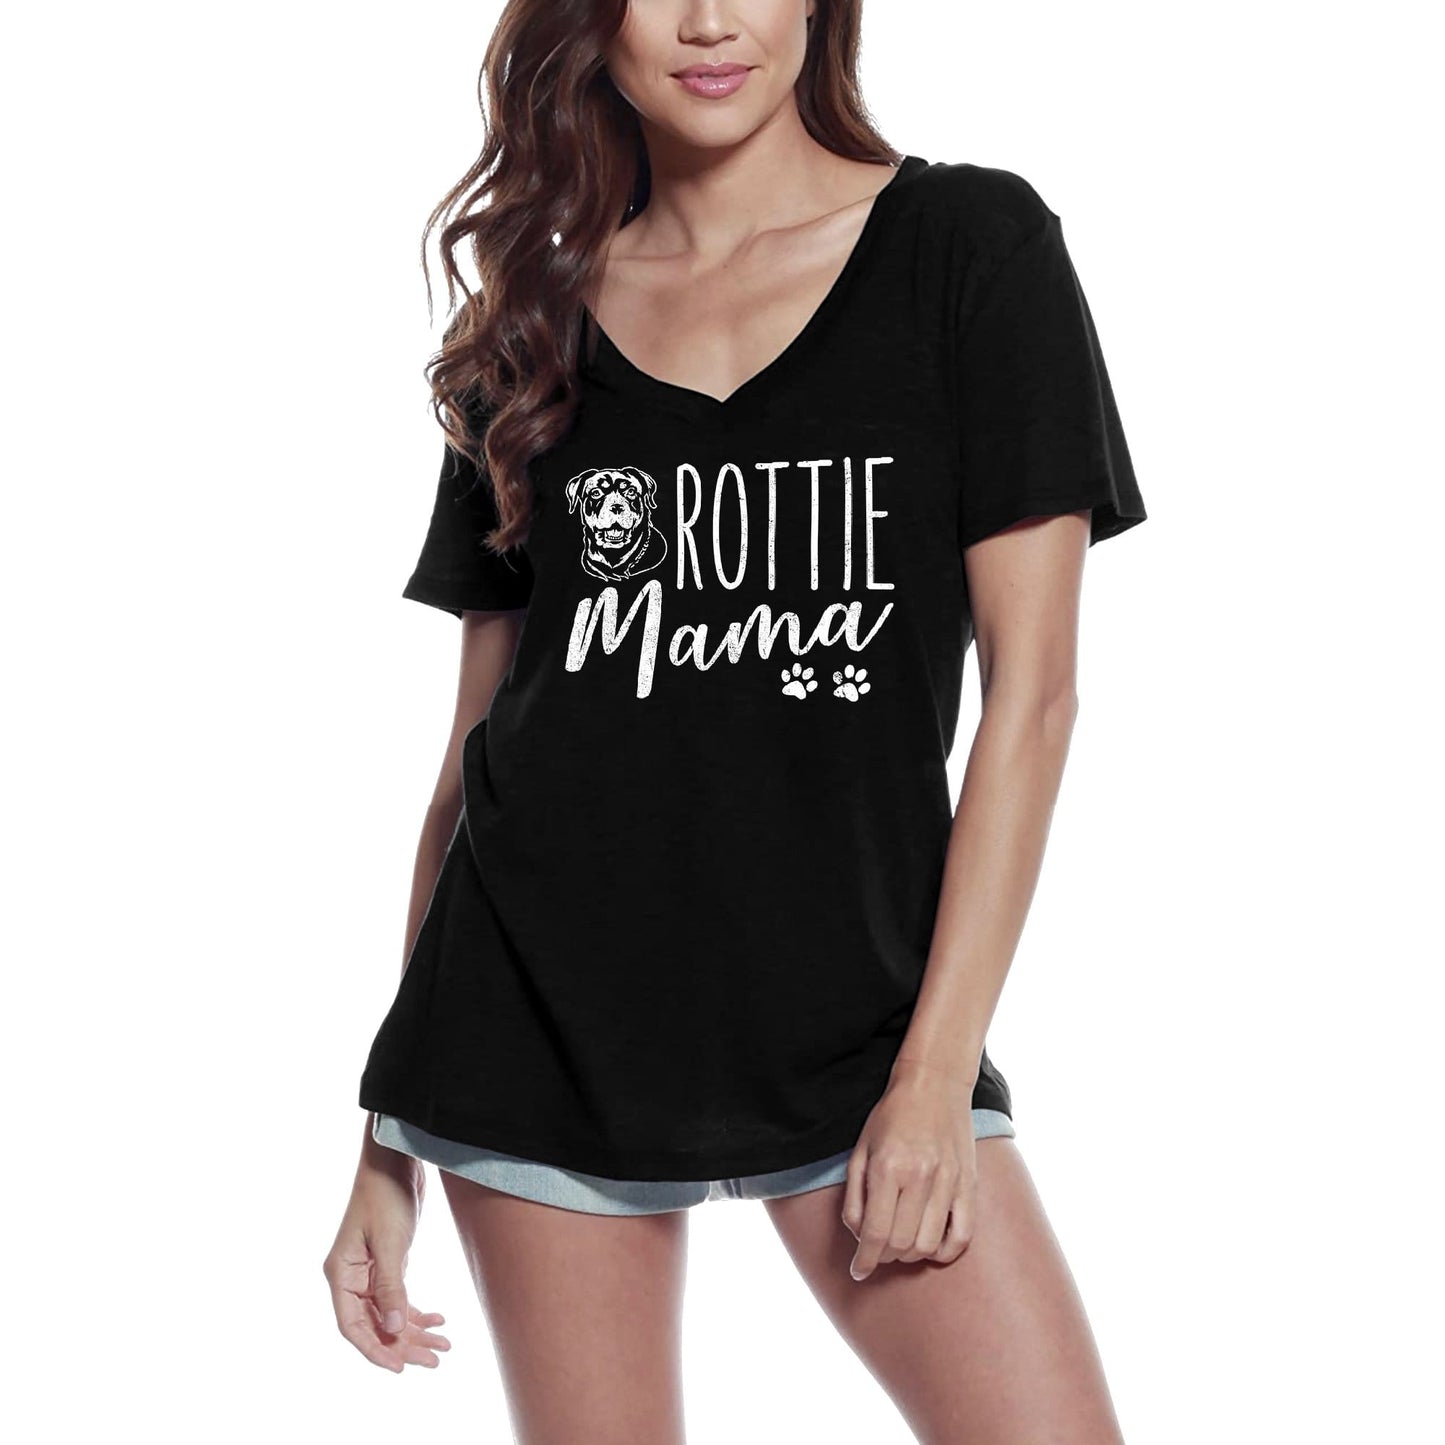 ULTRABASIC Women's T-Shirt Rottie Mama Paw - Rottweiler Mom Mother Dog Lover Tee Shirt for Ladies